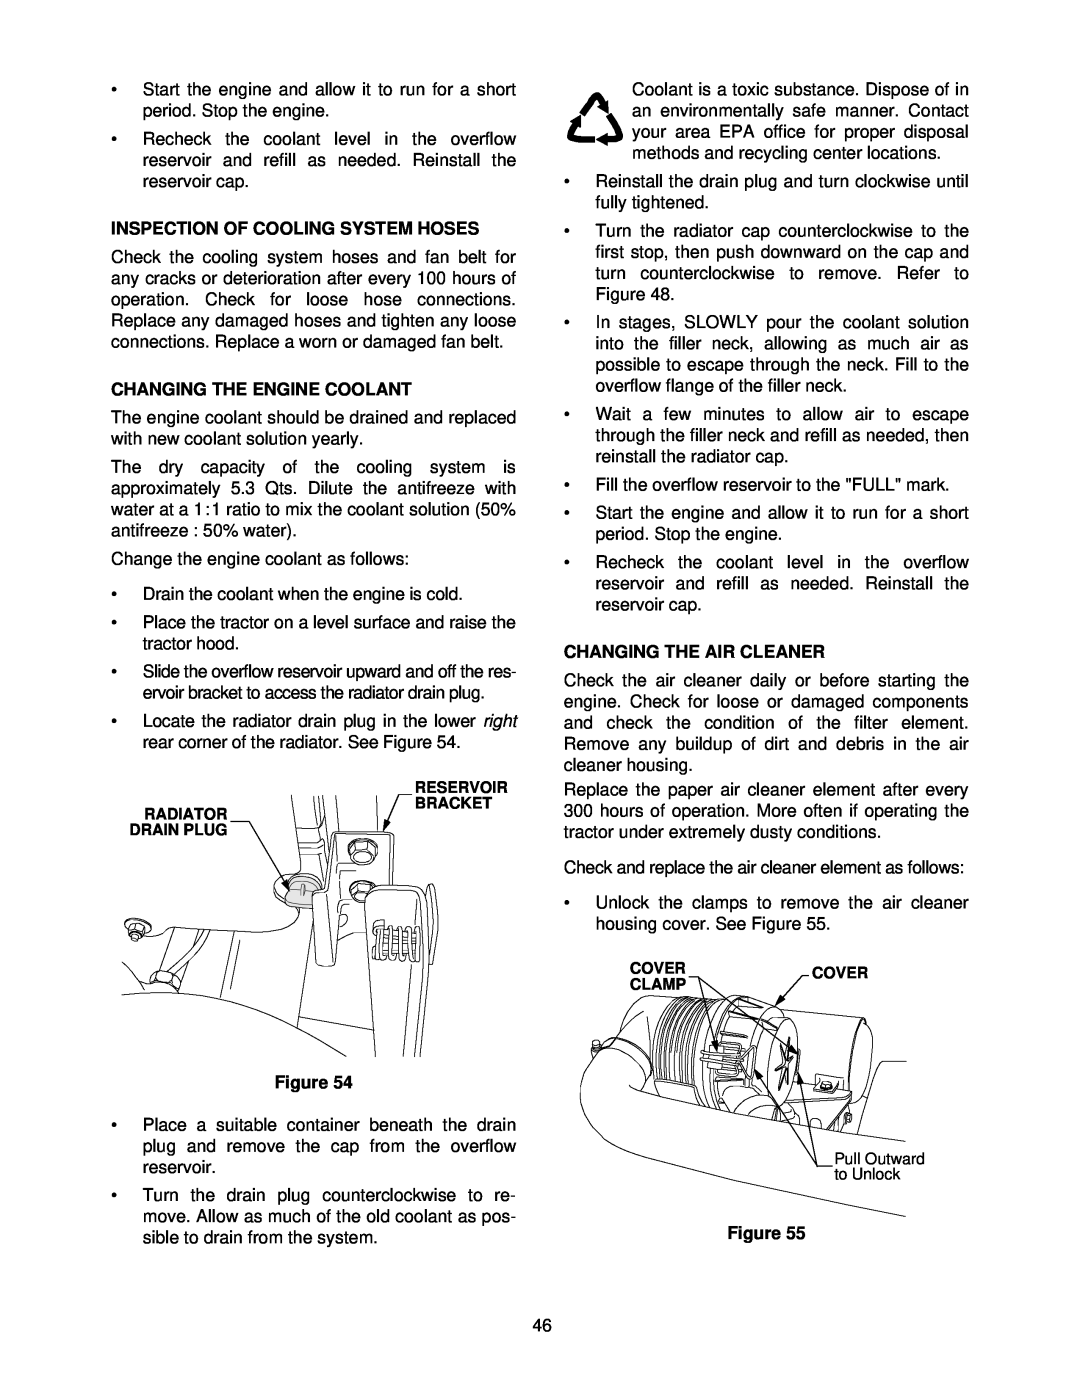 Cub Cadet 7264 manual Inspection Of Cooling System Hoses, Changing The Engine Coolant, Changing The Air Cleaner 